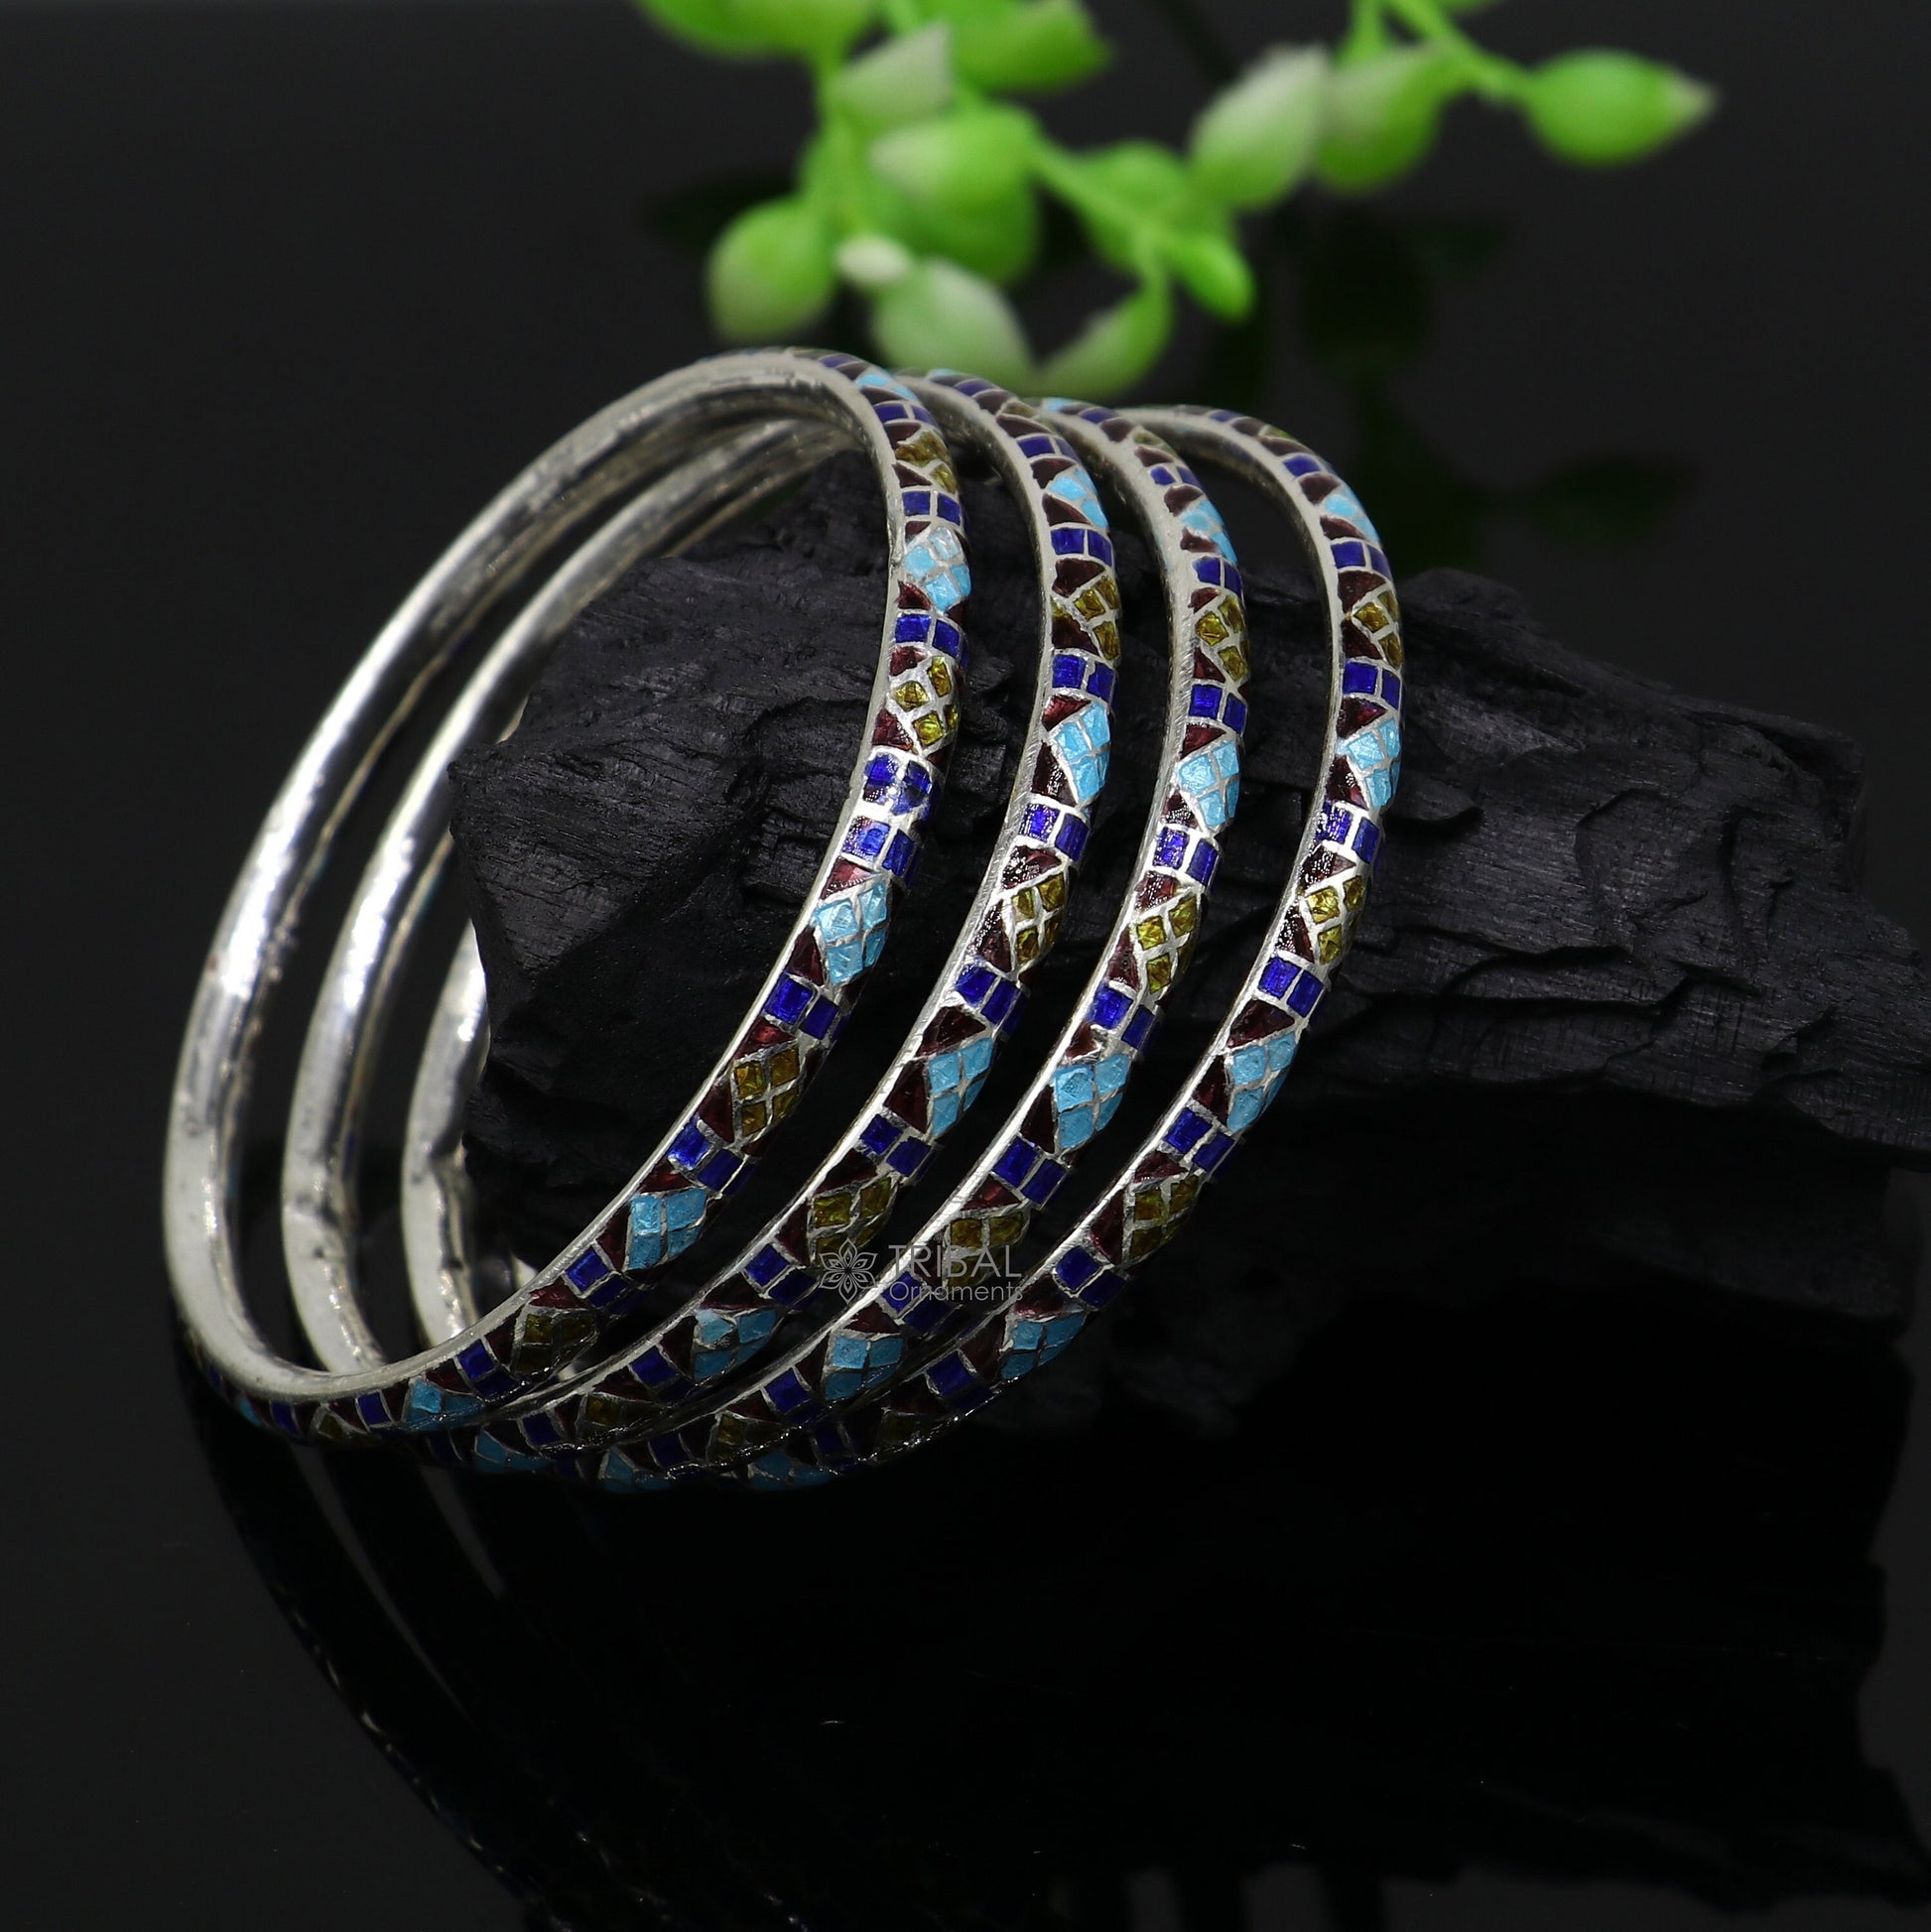 New fancy 925 Sterling silver Traditional cultural design meenakari (color enamel )bangles bracelet trendy style jewelry from india nba376 - TRIBAL ORNAMENTS